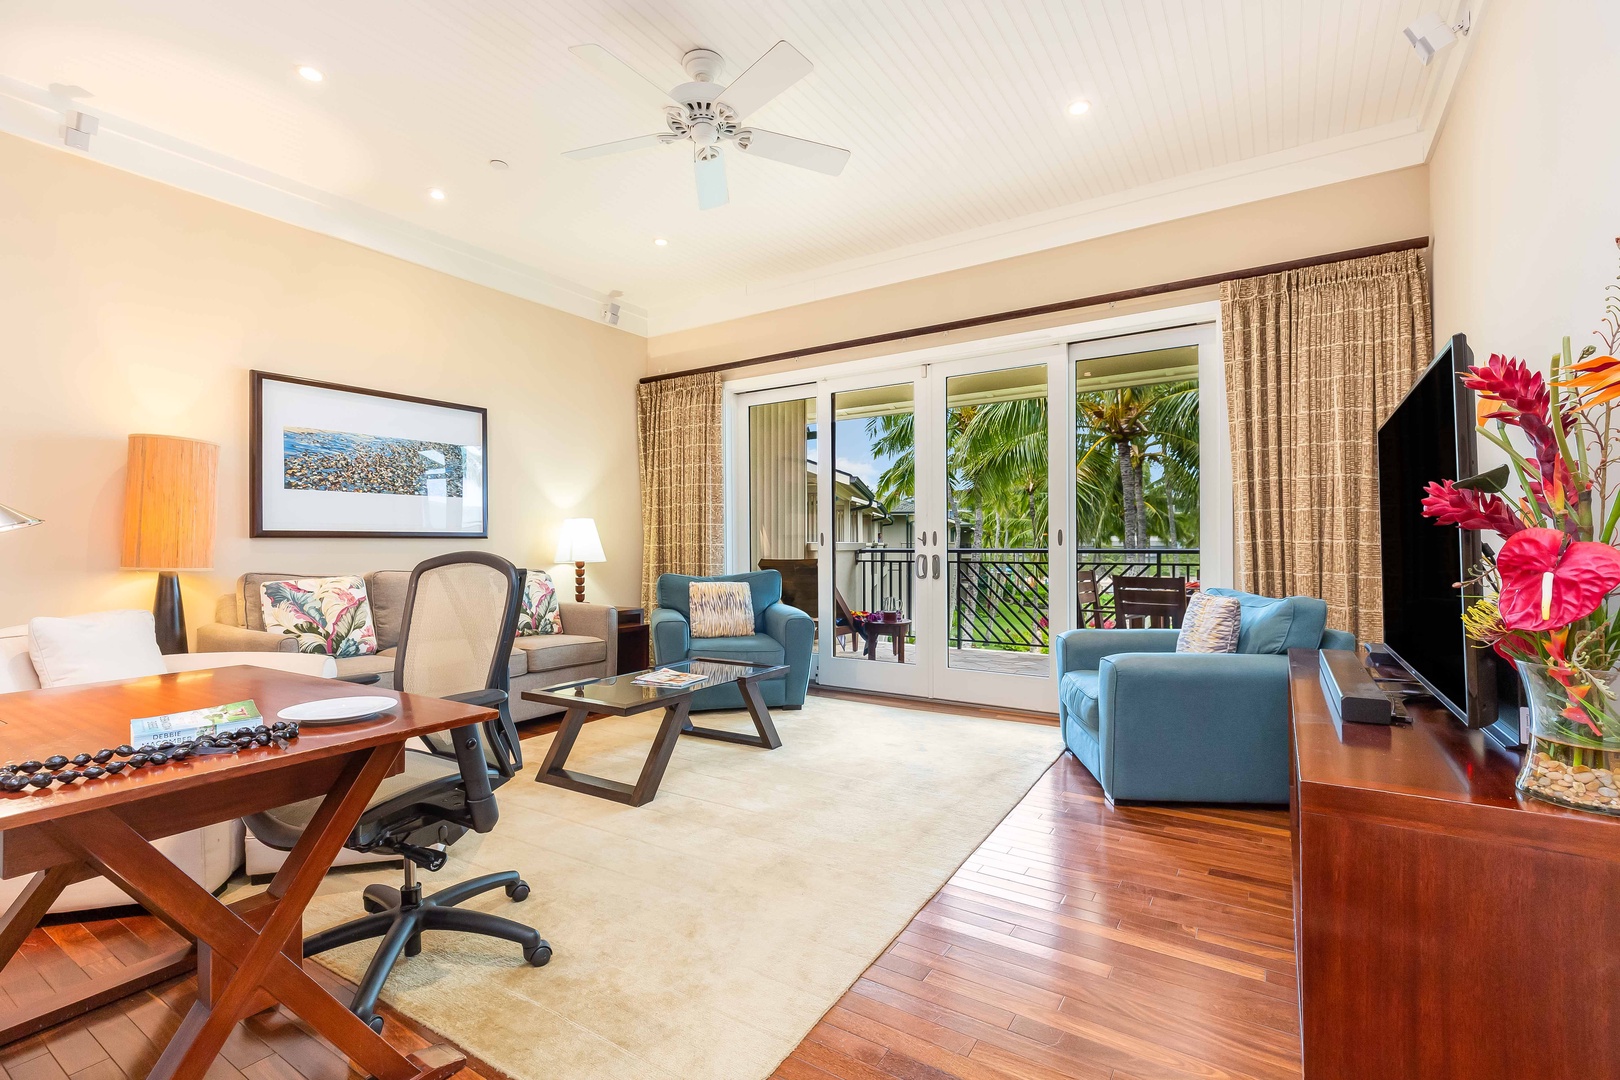 Kahuku Vacation Rentals, Turtle Bay Villas 310 - Convenient Workspace in the Living Room